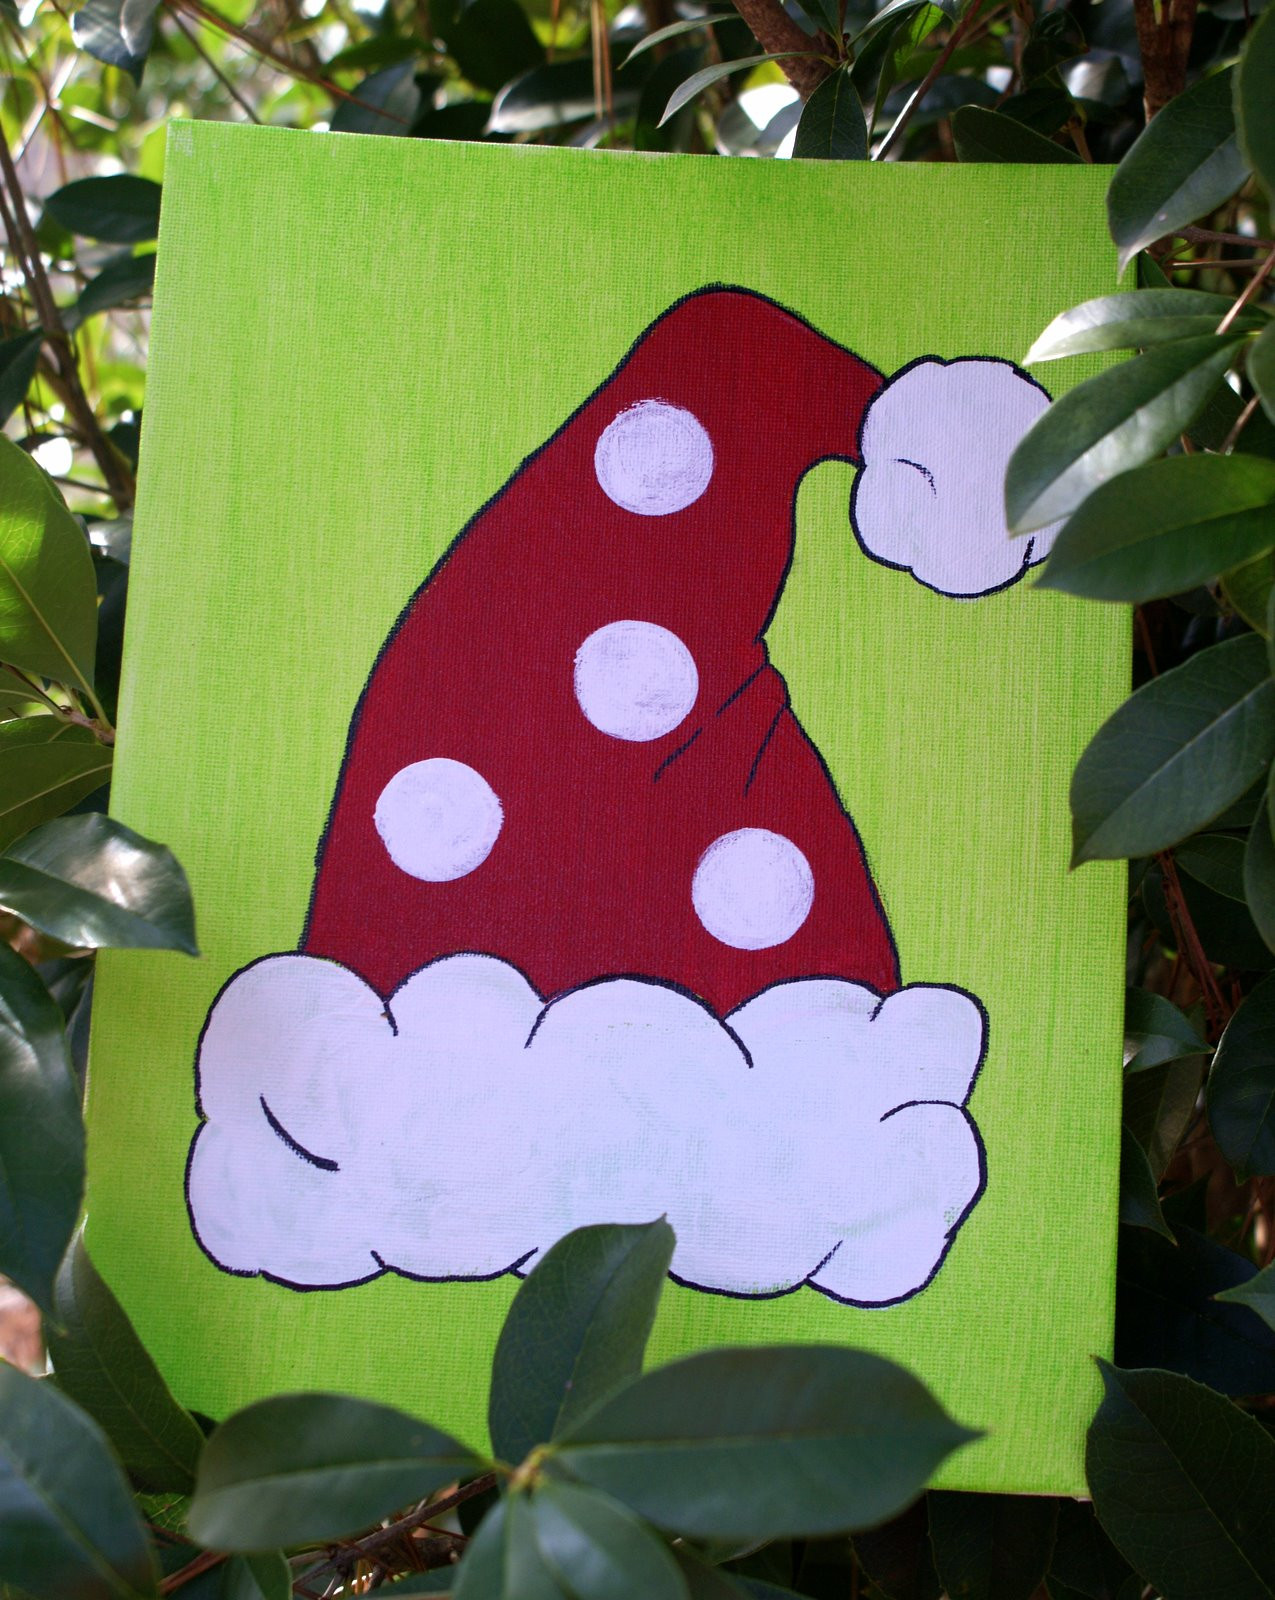 Christmas Canvas Painting Ideas
 A Little Loveliness Christmas P art y